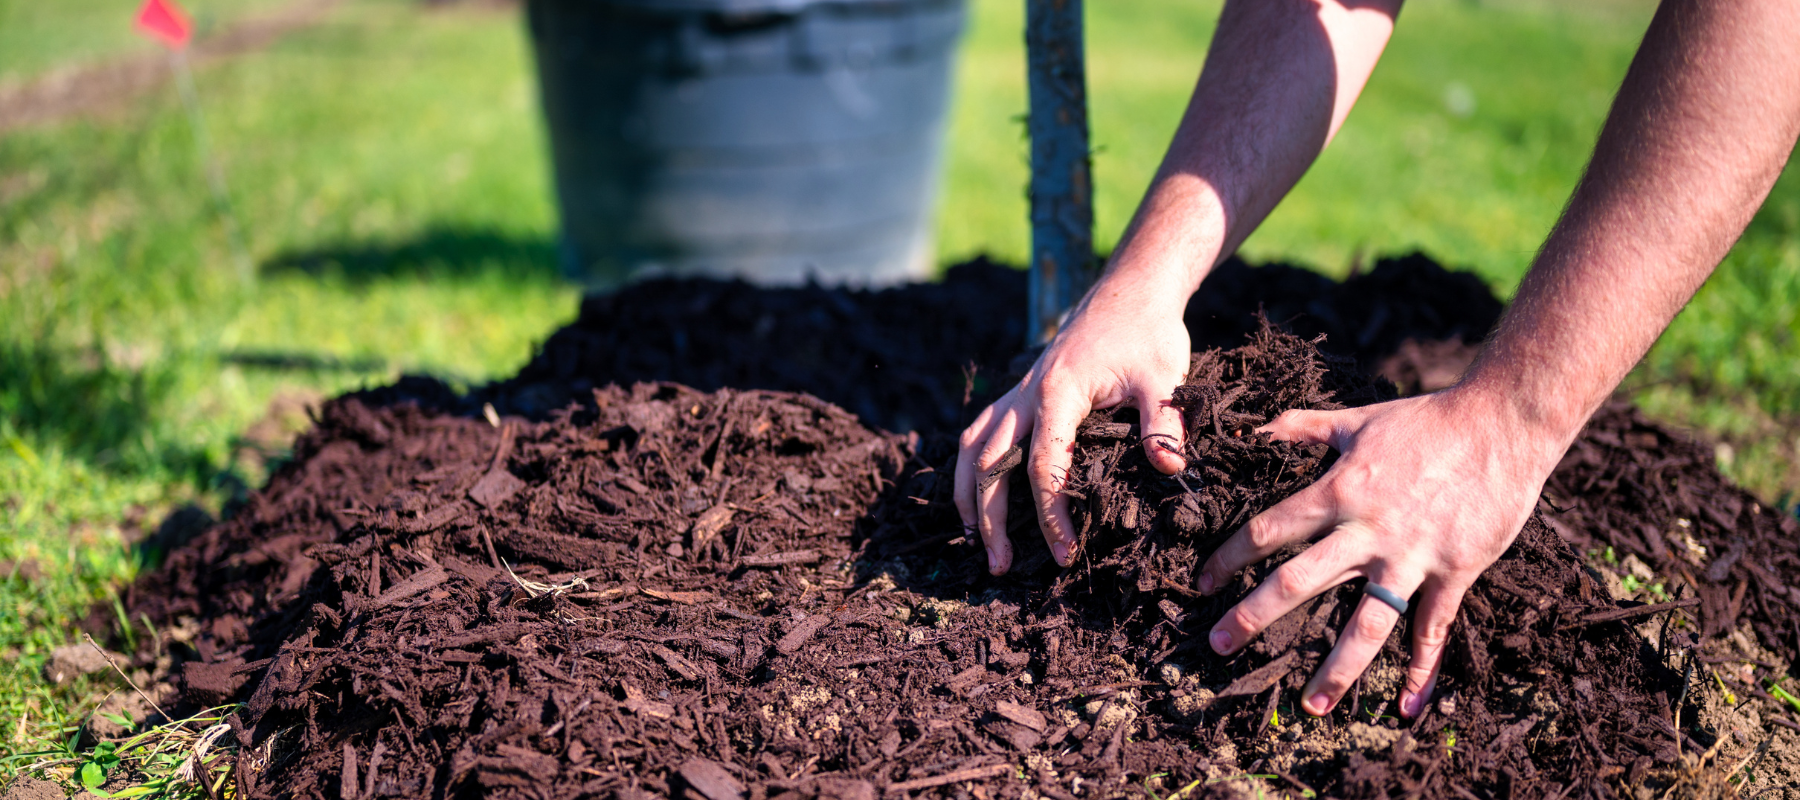 Why is mulching important?